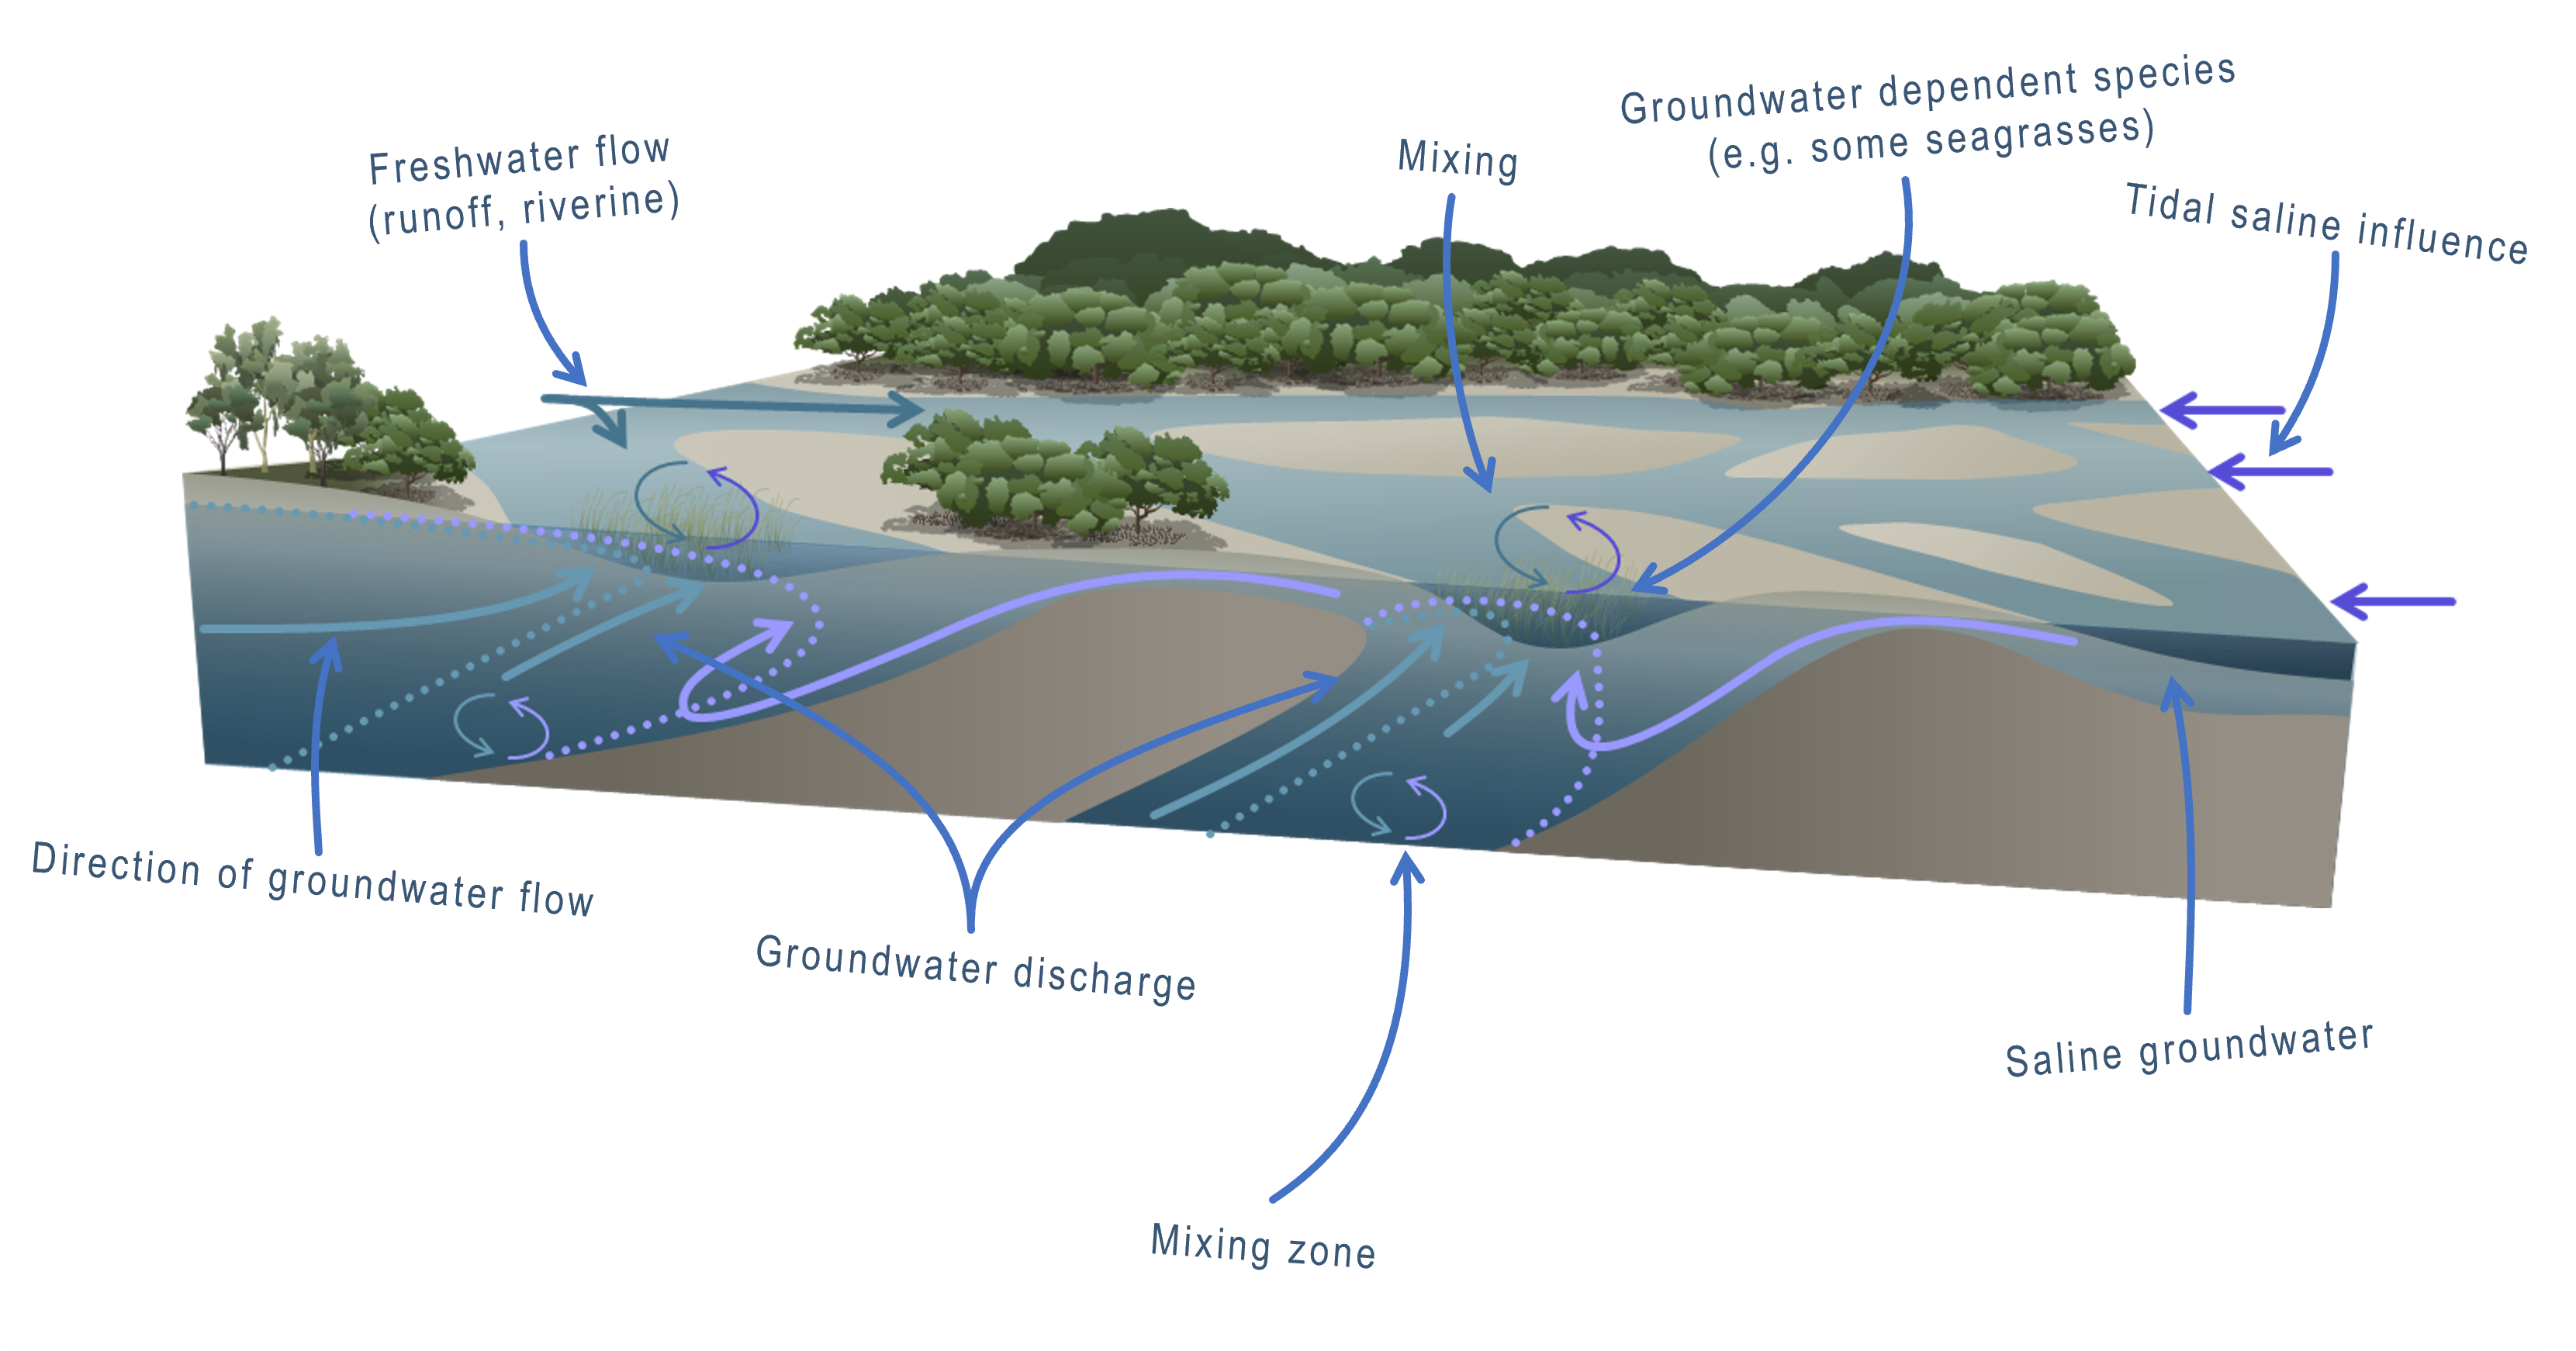 Groundwater discharge to the sea. Waves and tides are involved in groundwater pumping and mixing